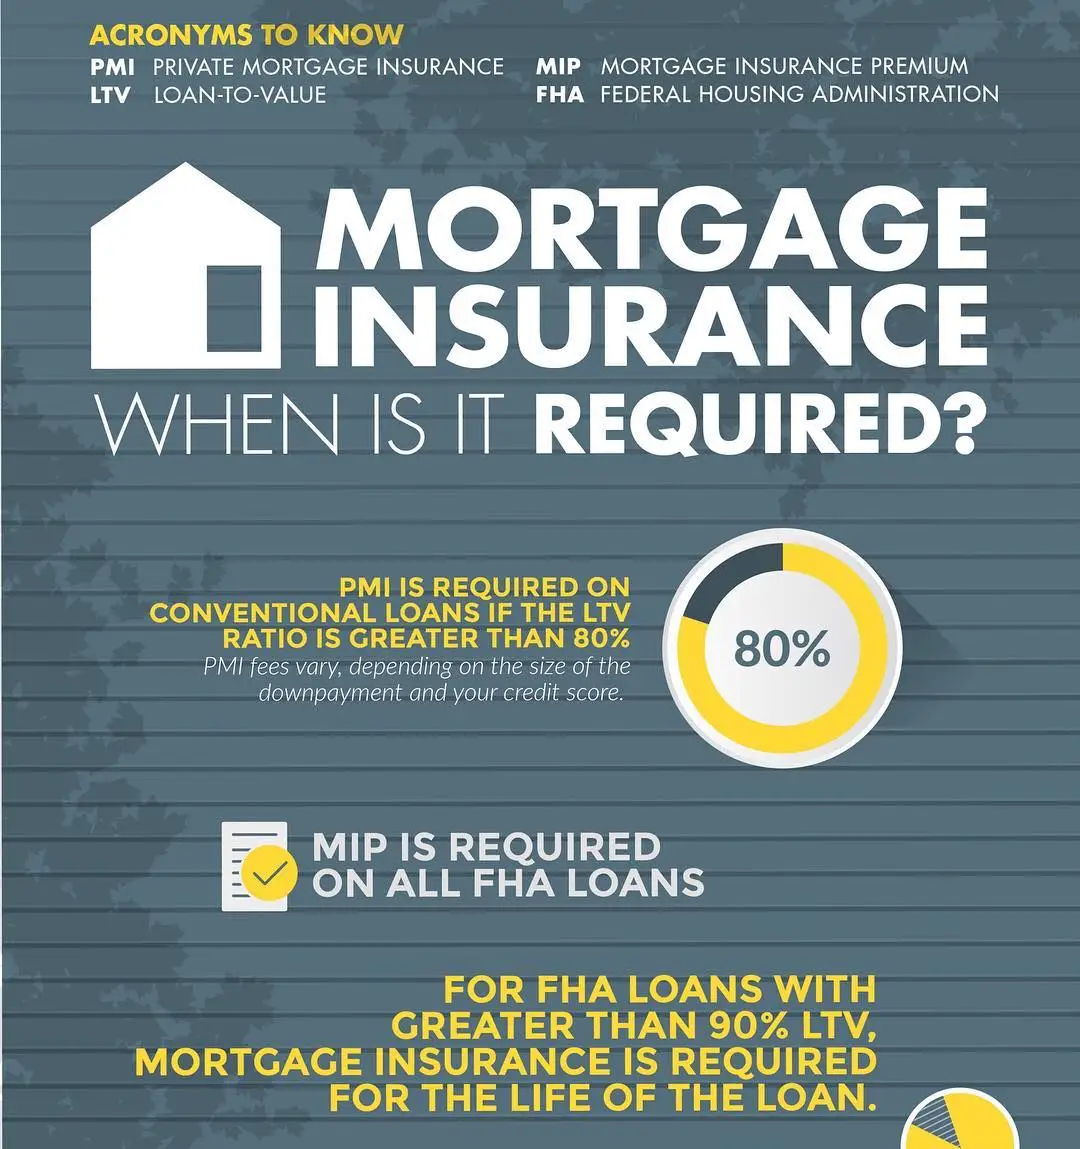 Something to take into account regarding FHA financing is that you can ...